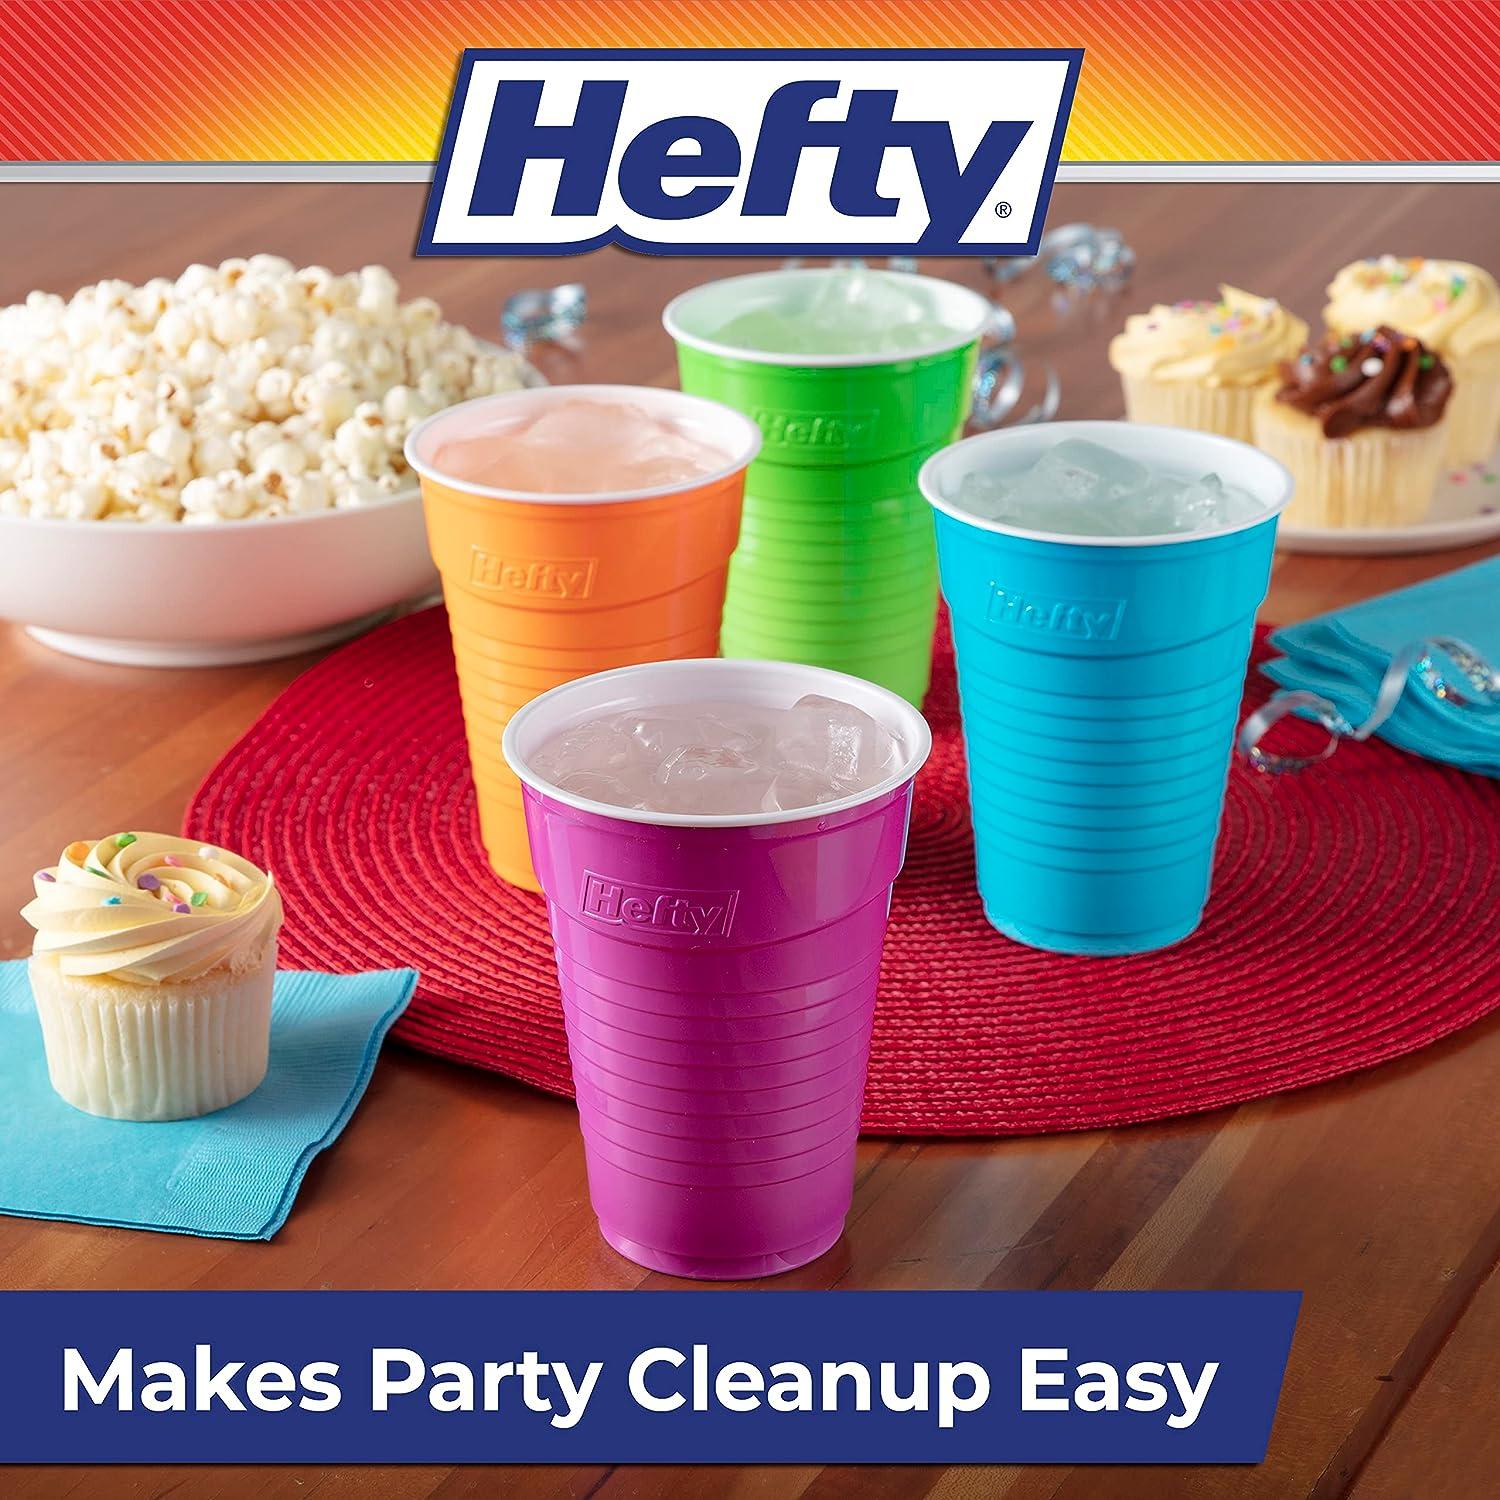 Hefty Easy Grip Disposable Plastic Party Cups, Assorted, 16 oz - 100 count